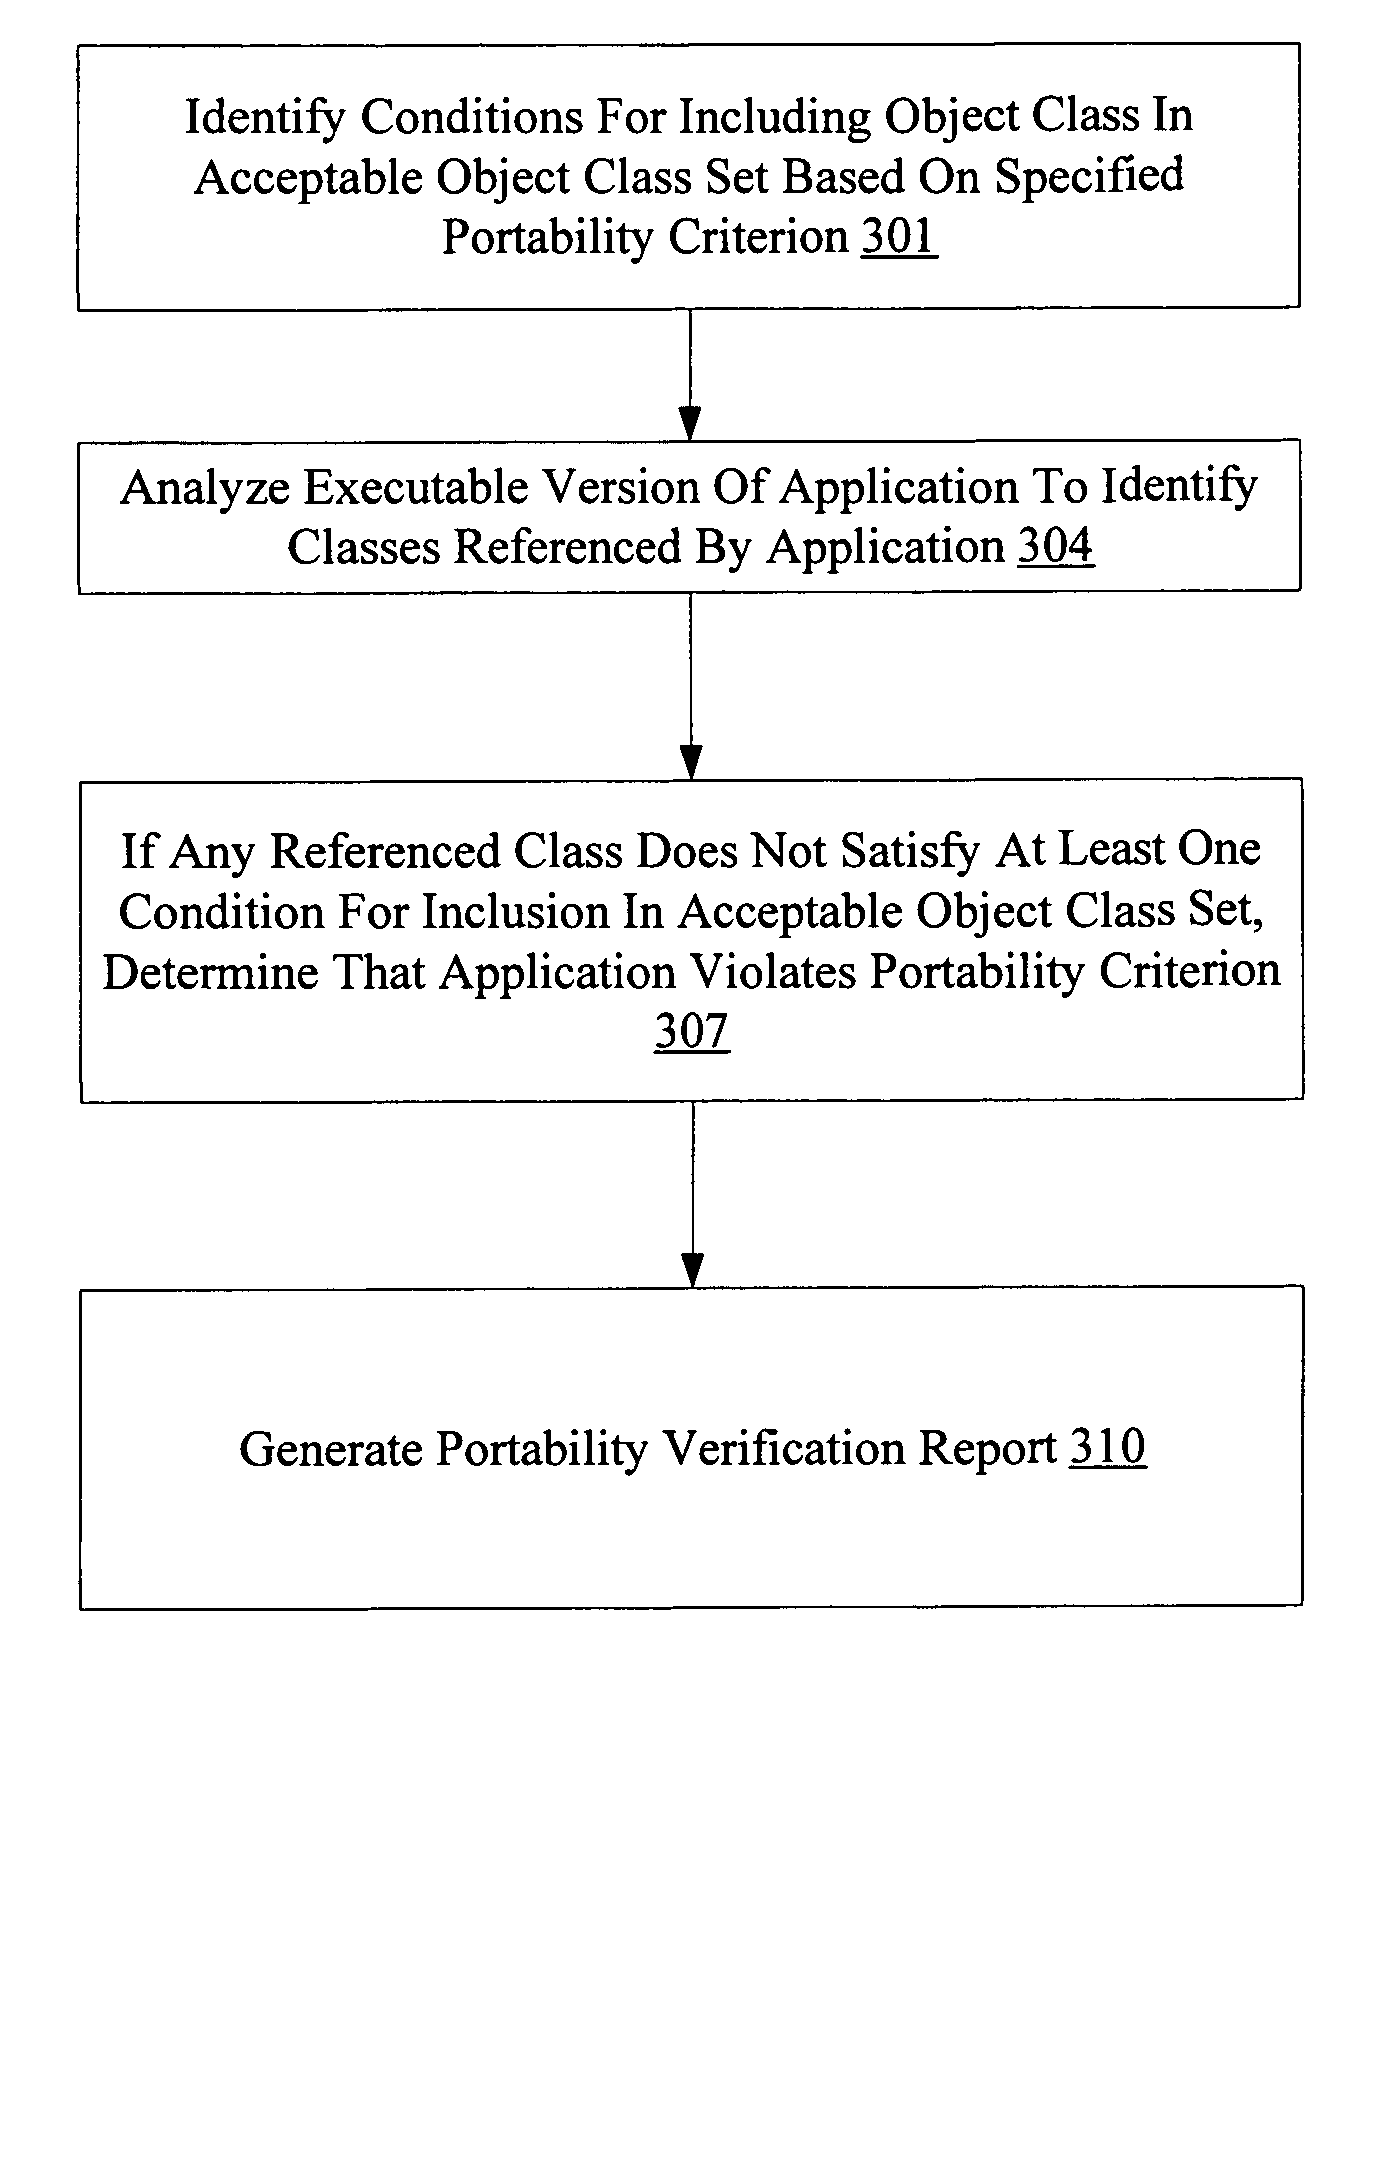 Detection of non-standard application programming interface usage via analysis of executable code